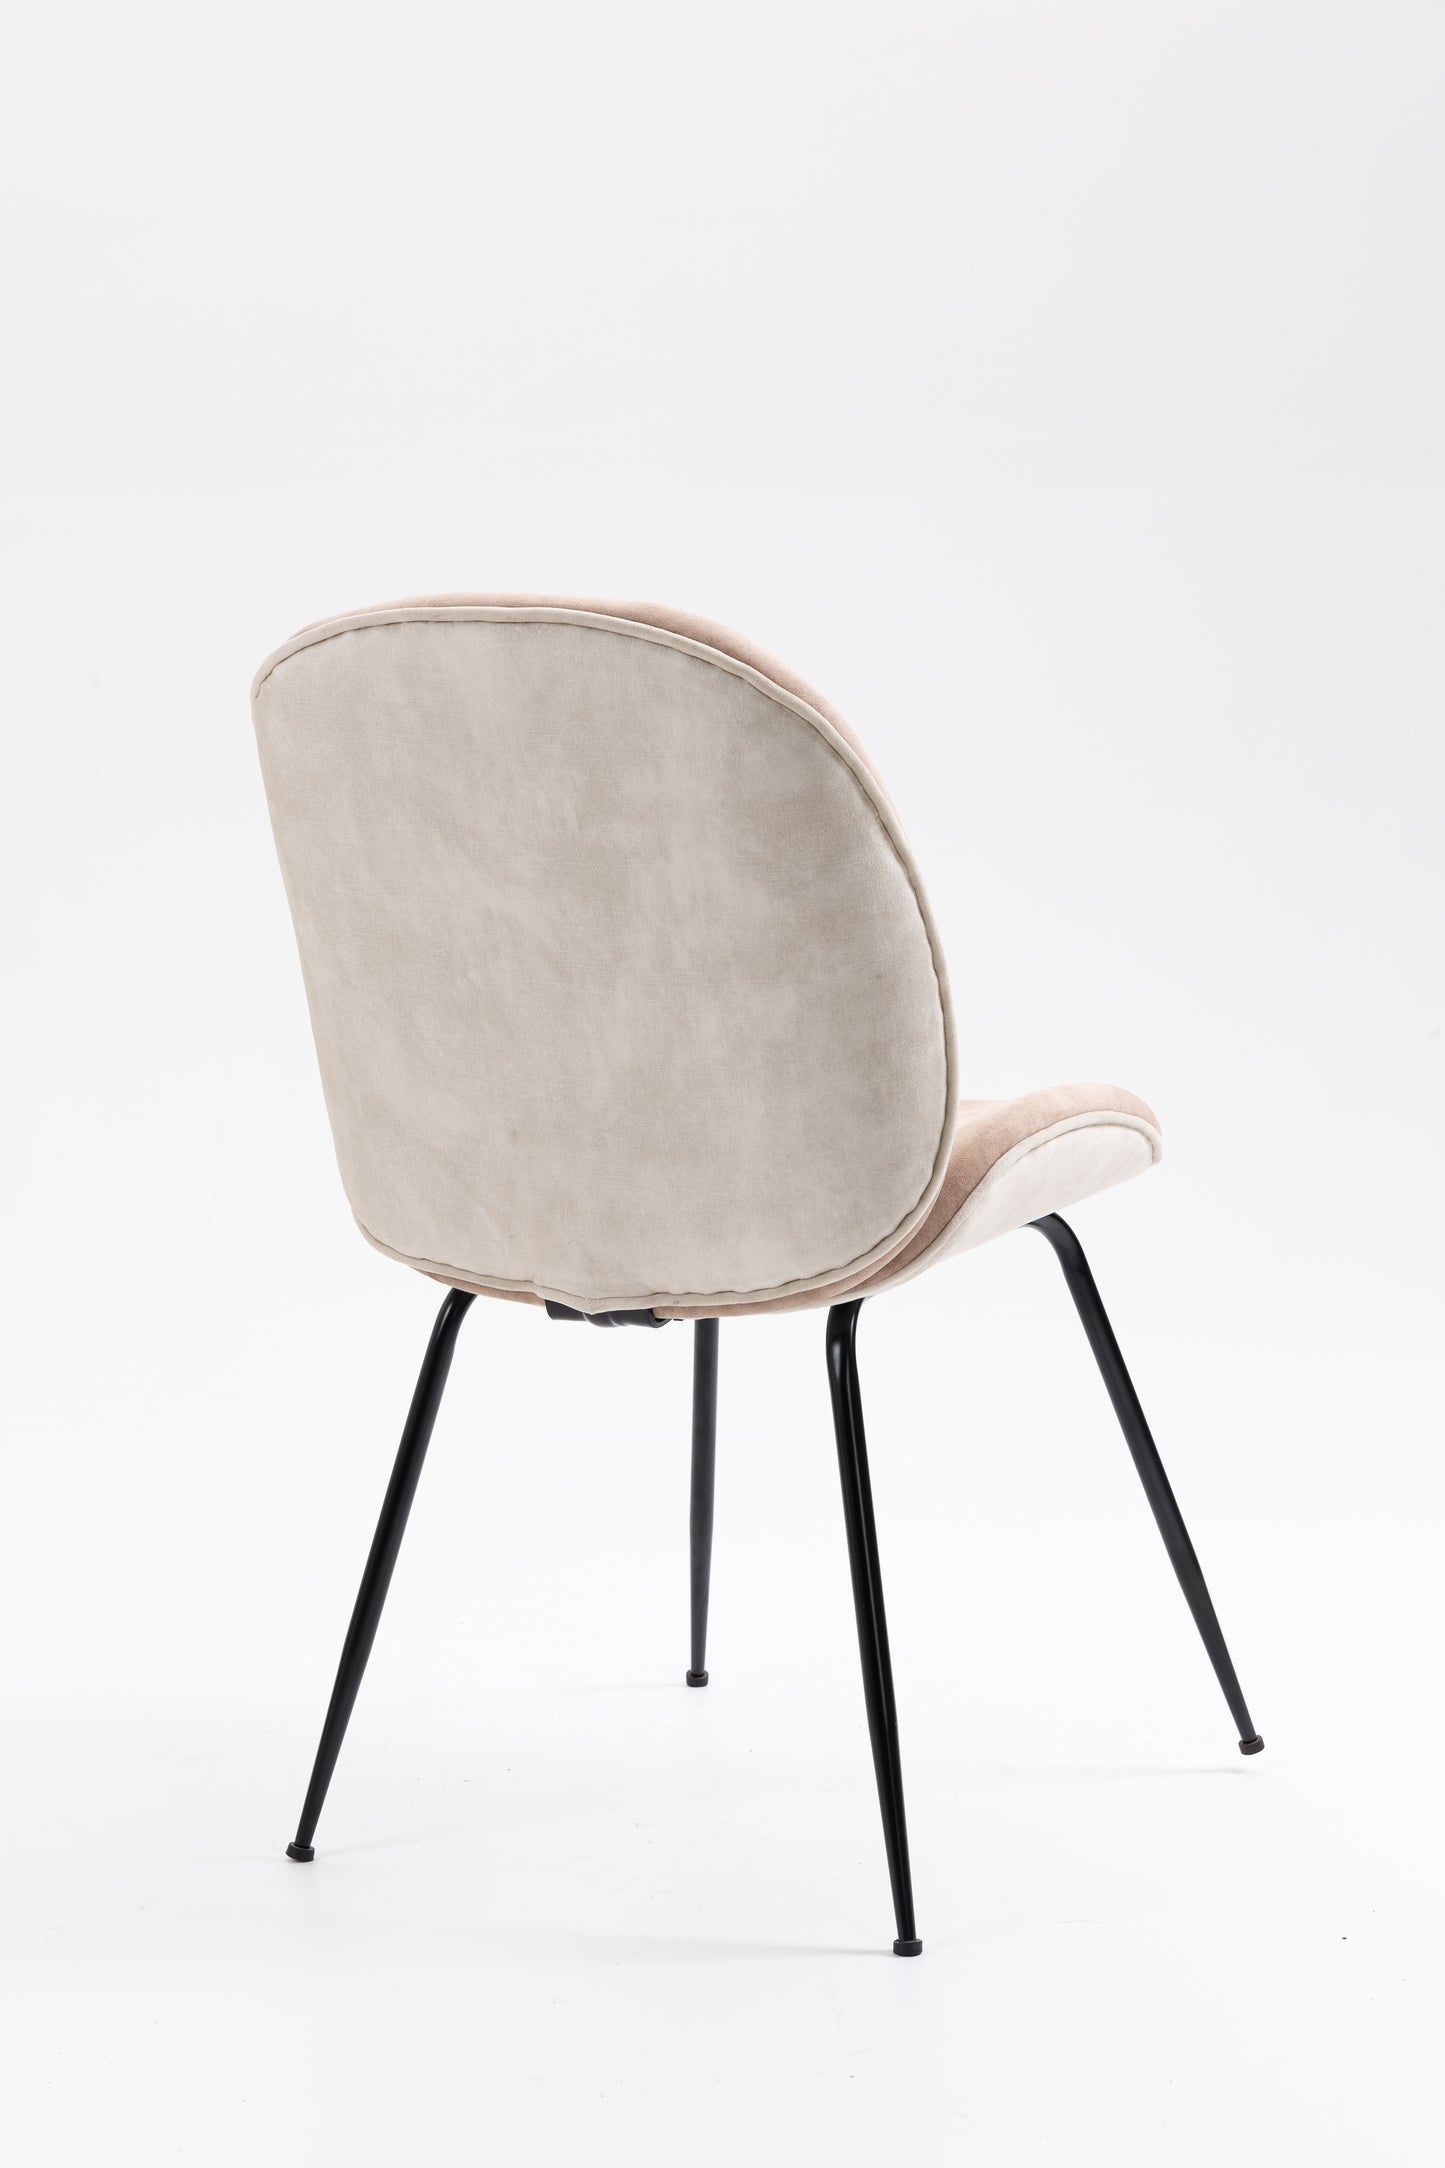 Upholstered Dining Chair with Metal Legs - Two Tone Taupe Velvet